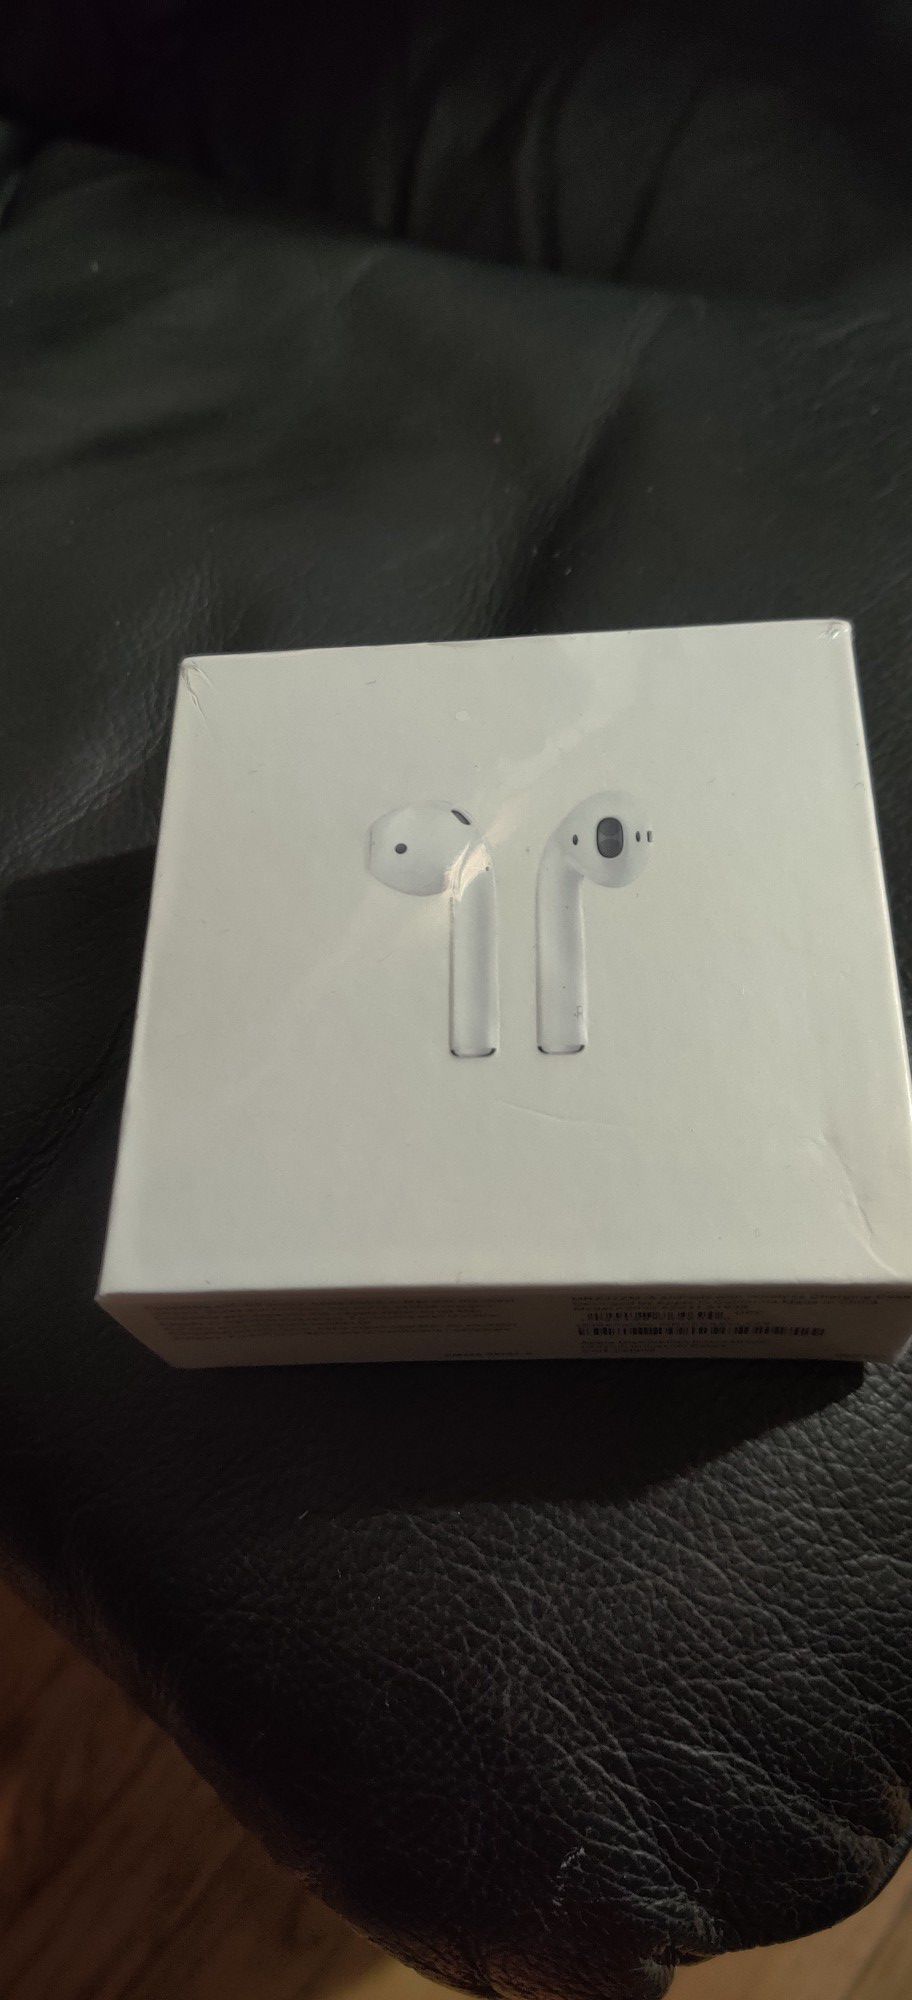 second generation Apple airpods .New never opened or used